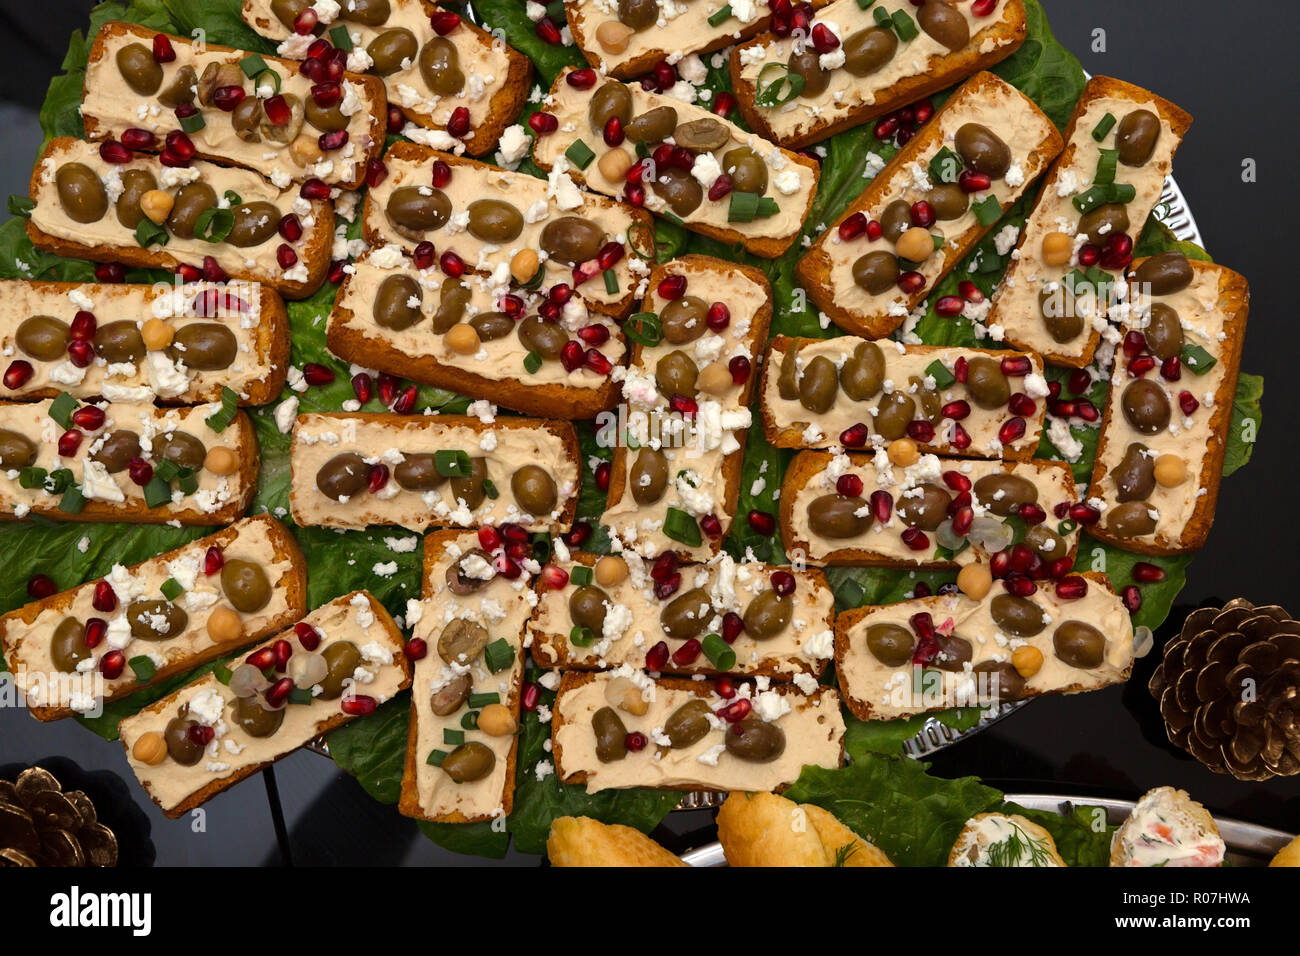 Delicious Party Finger Food With Festive Decorations Stock Photo